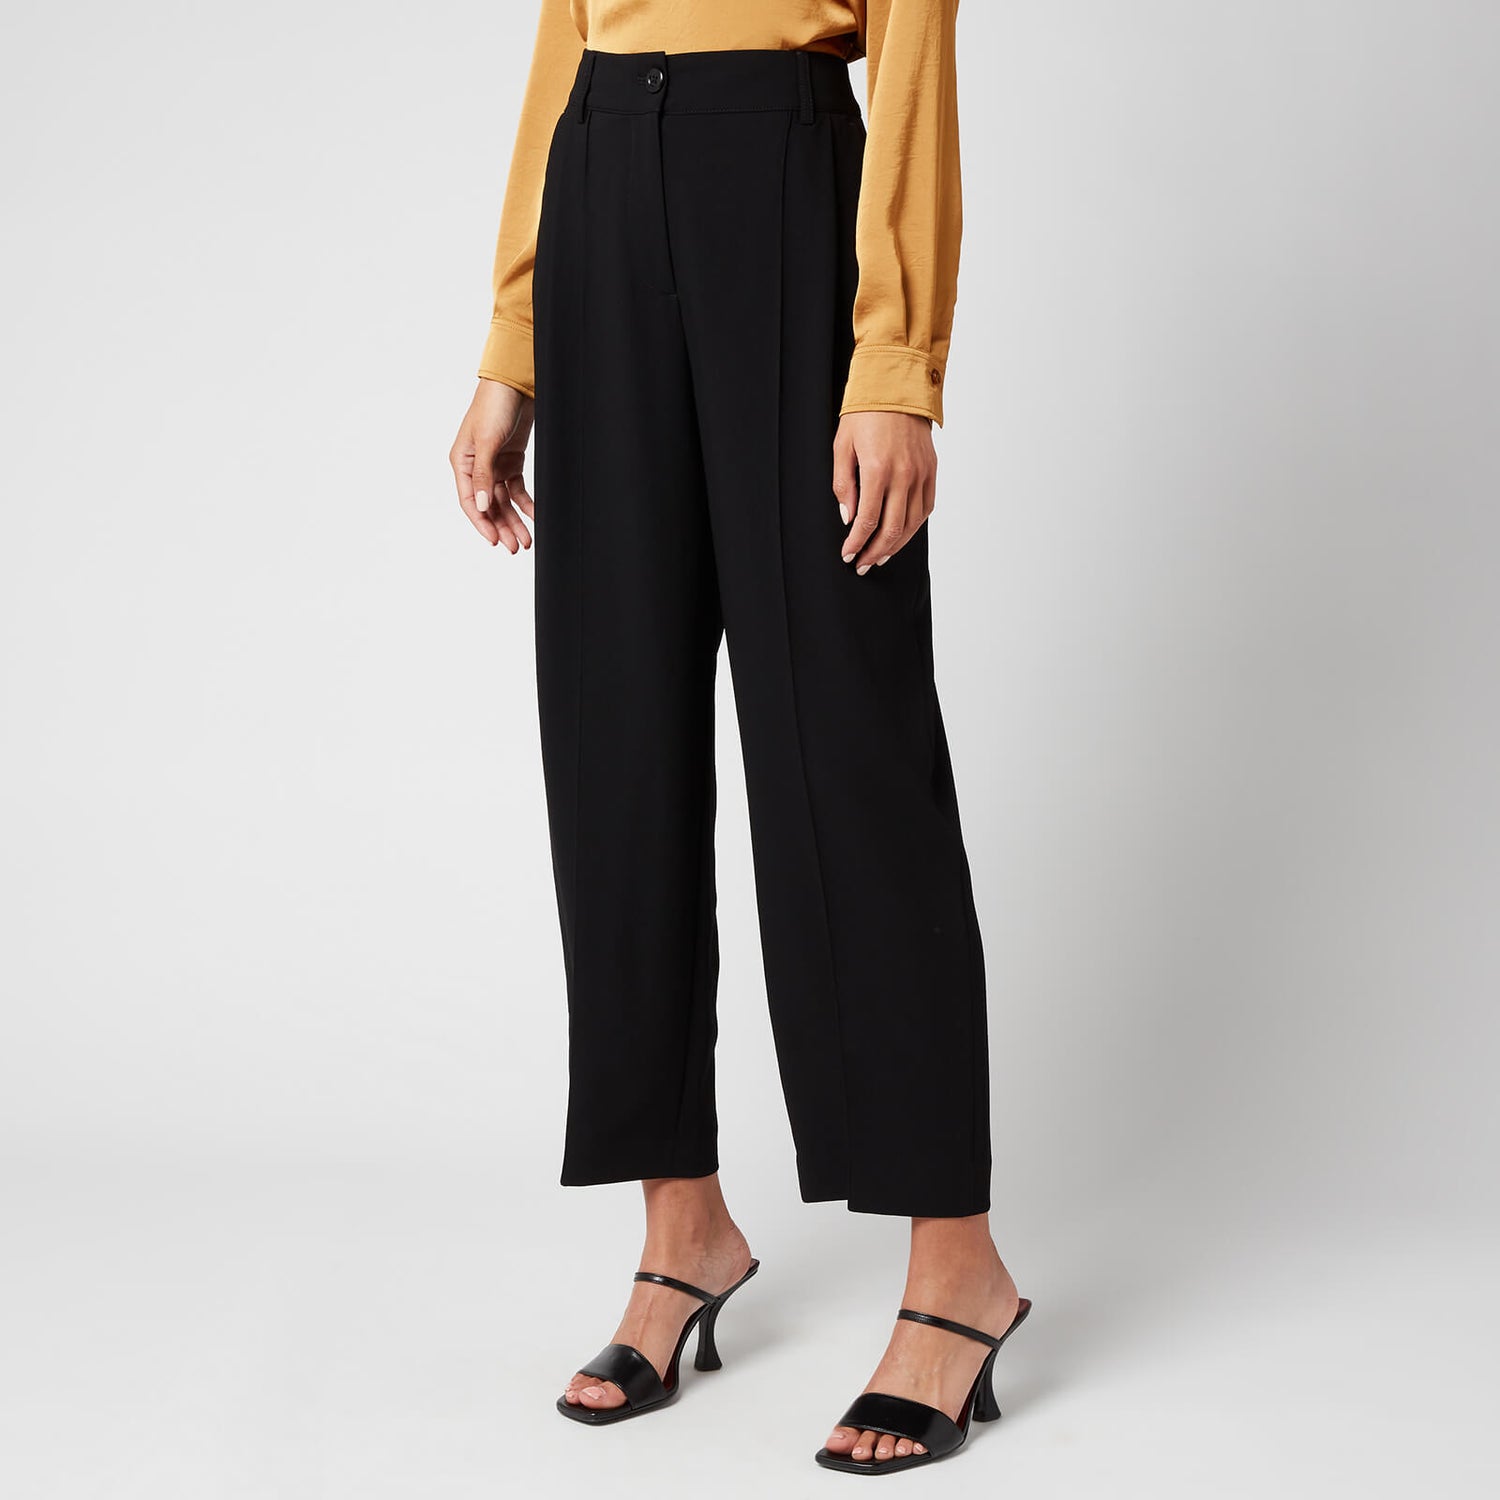 See By Chloé Women's Crepe Trousers - Black